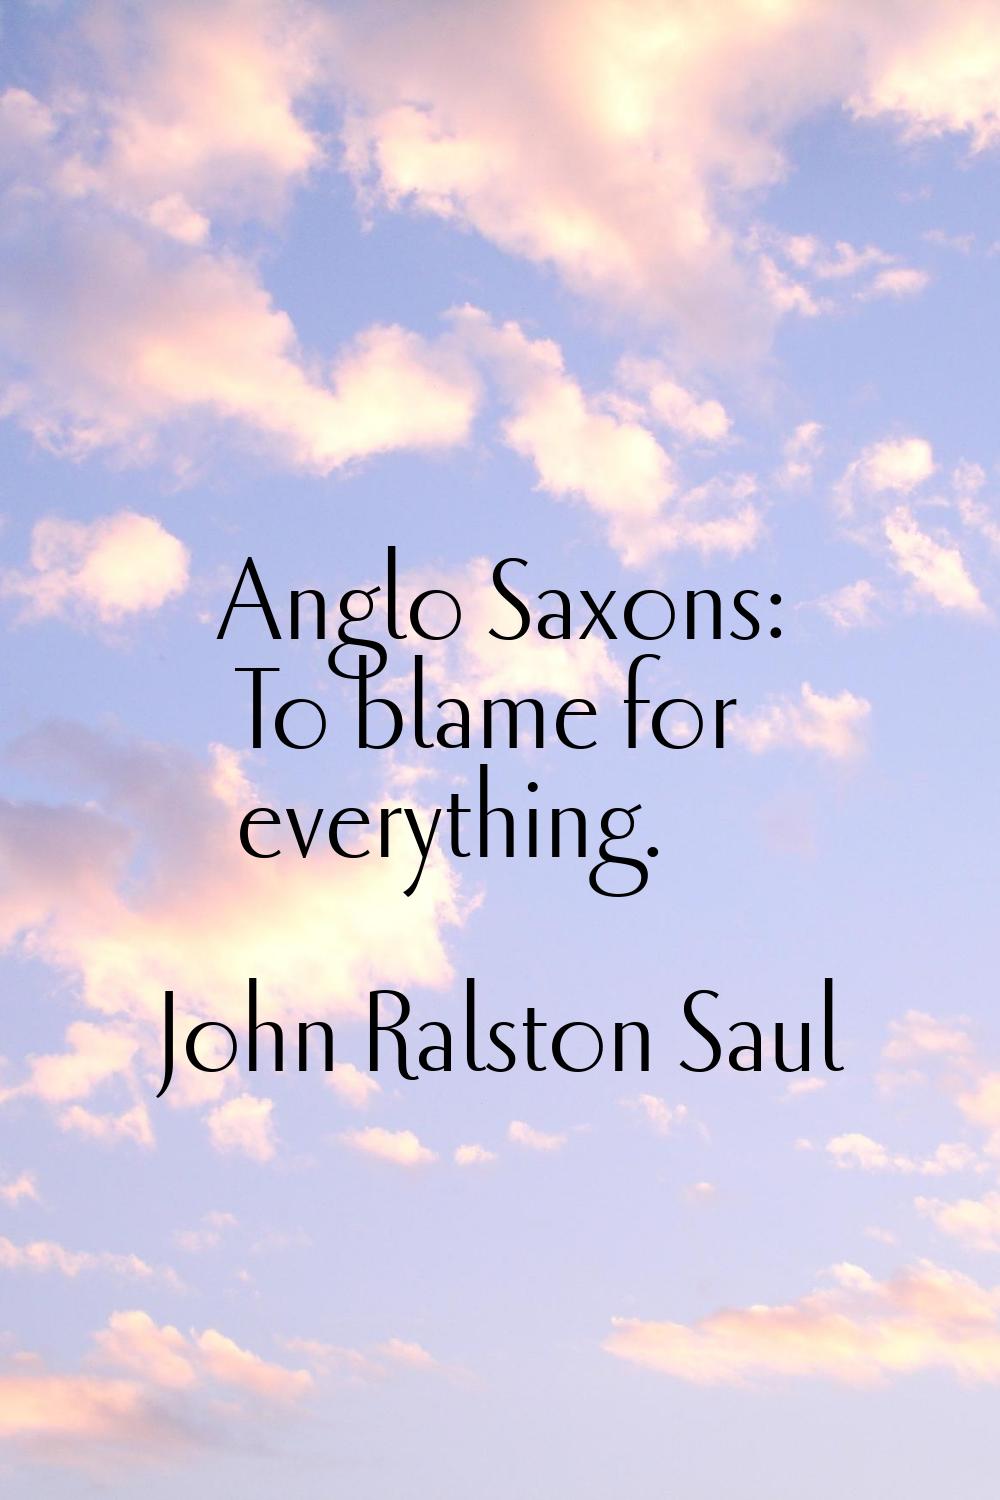 Anglo Saxons: To blame for everything.